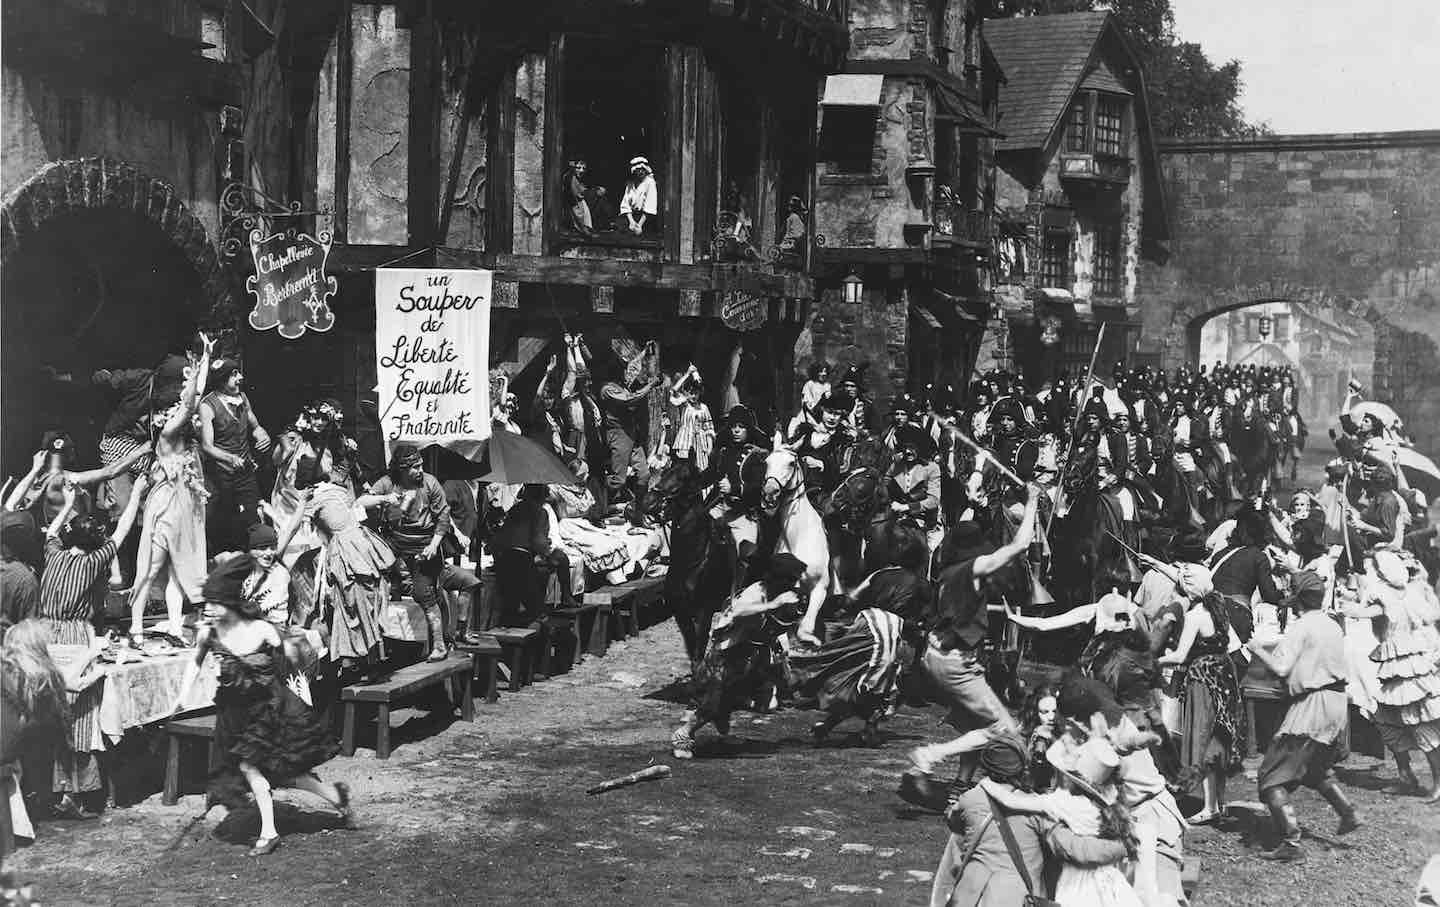 A scene from the film “Orphans of the Storm” depicting a group carrying a sign bearing the slogan “Liberté, Egalité et Fraternité,” 1921.